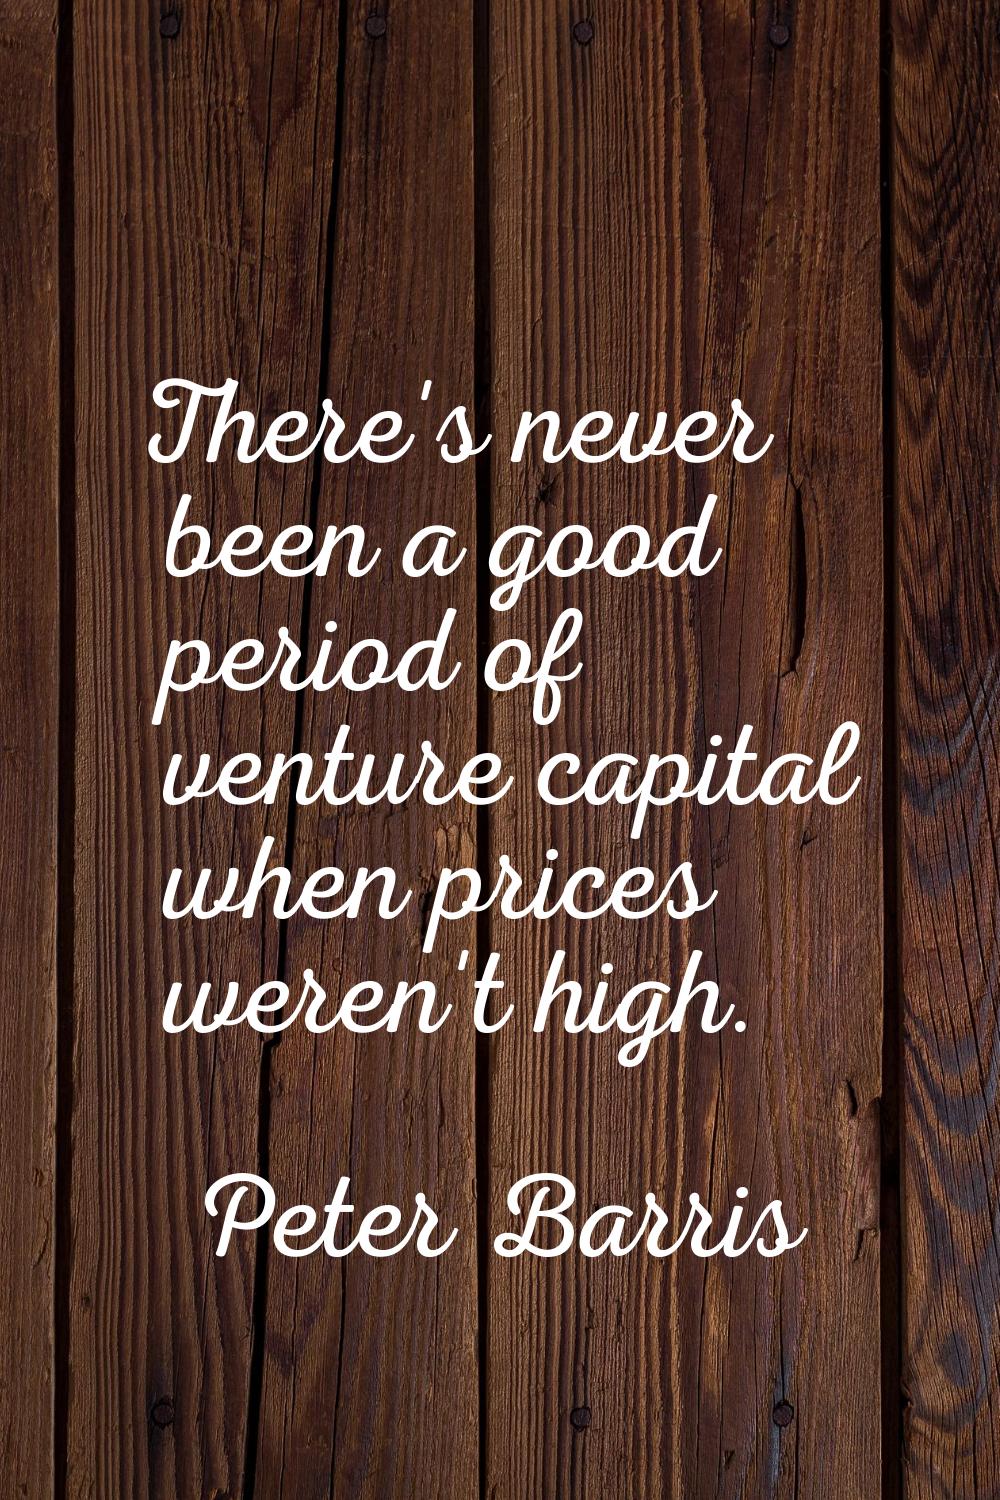 There's never been a good period of venture capital when prices weren't high.